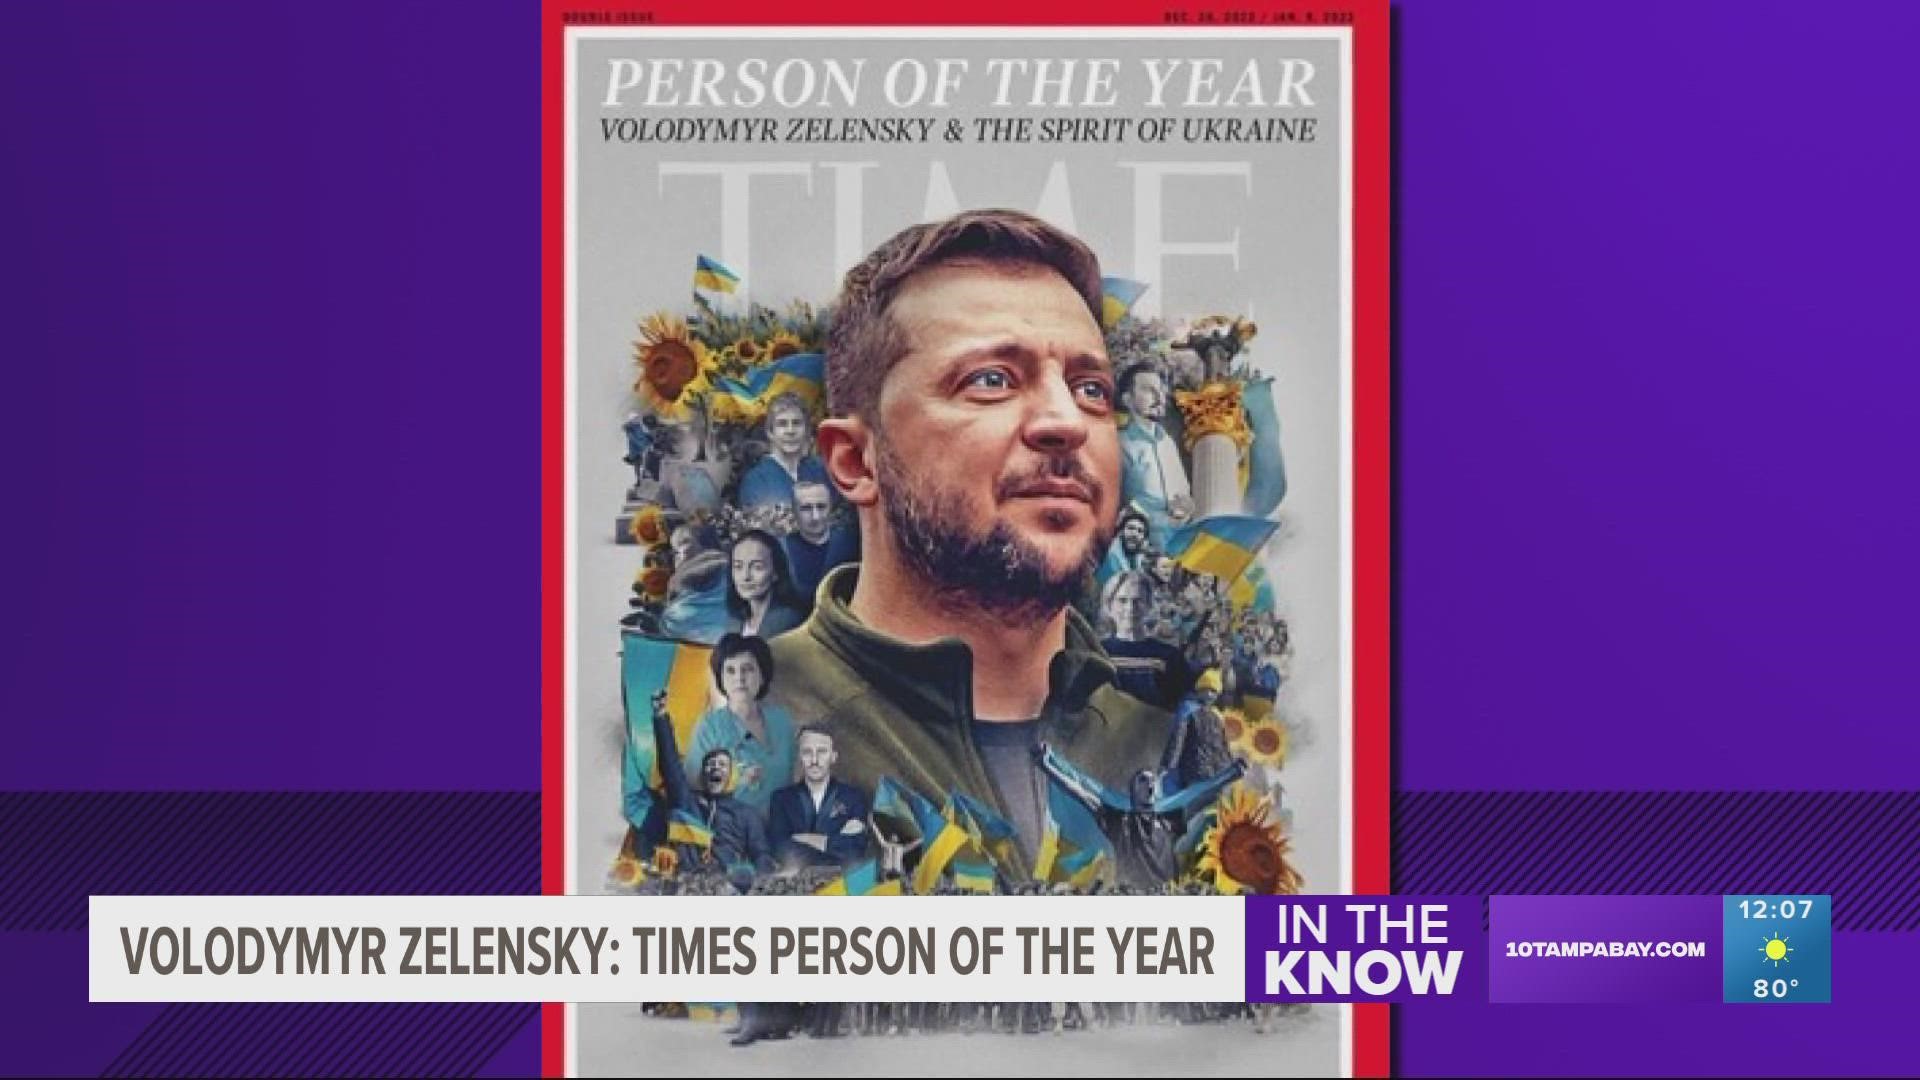 Ukrainian President Volodymyr Zelensky has been selected as TIME's Person of the Year for 2022 because he embodies the spirit of Ukraine, according to the magazine.